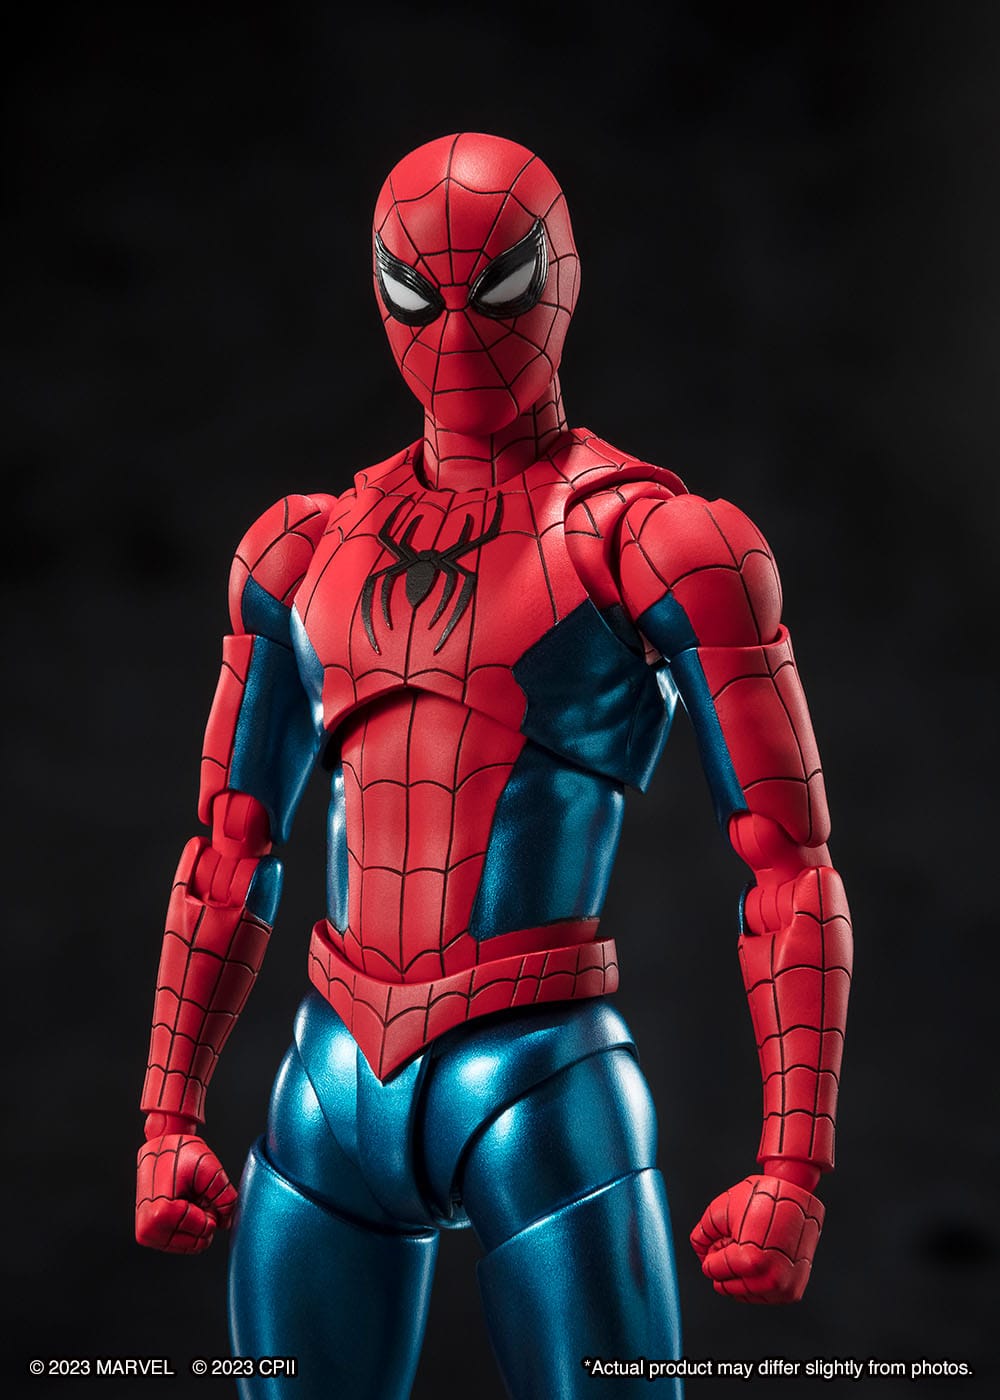 Spider-Man No Way Home S.H.Figuarts Spider-Man (New Red & Blue Suit) Action Figure